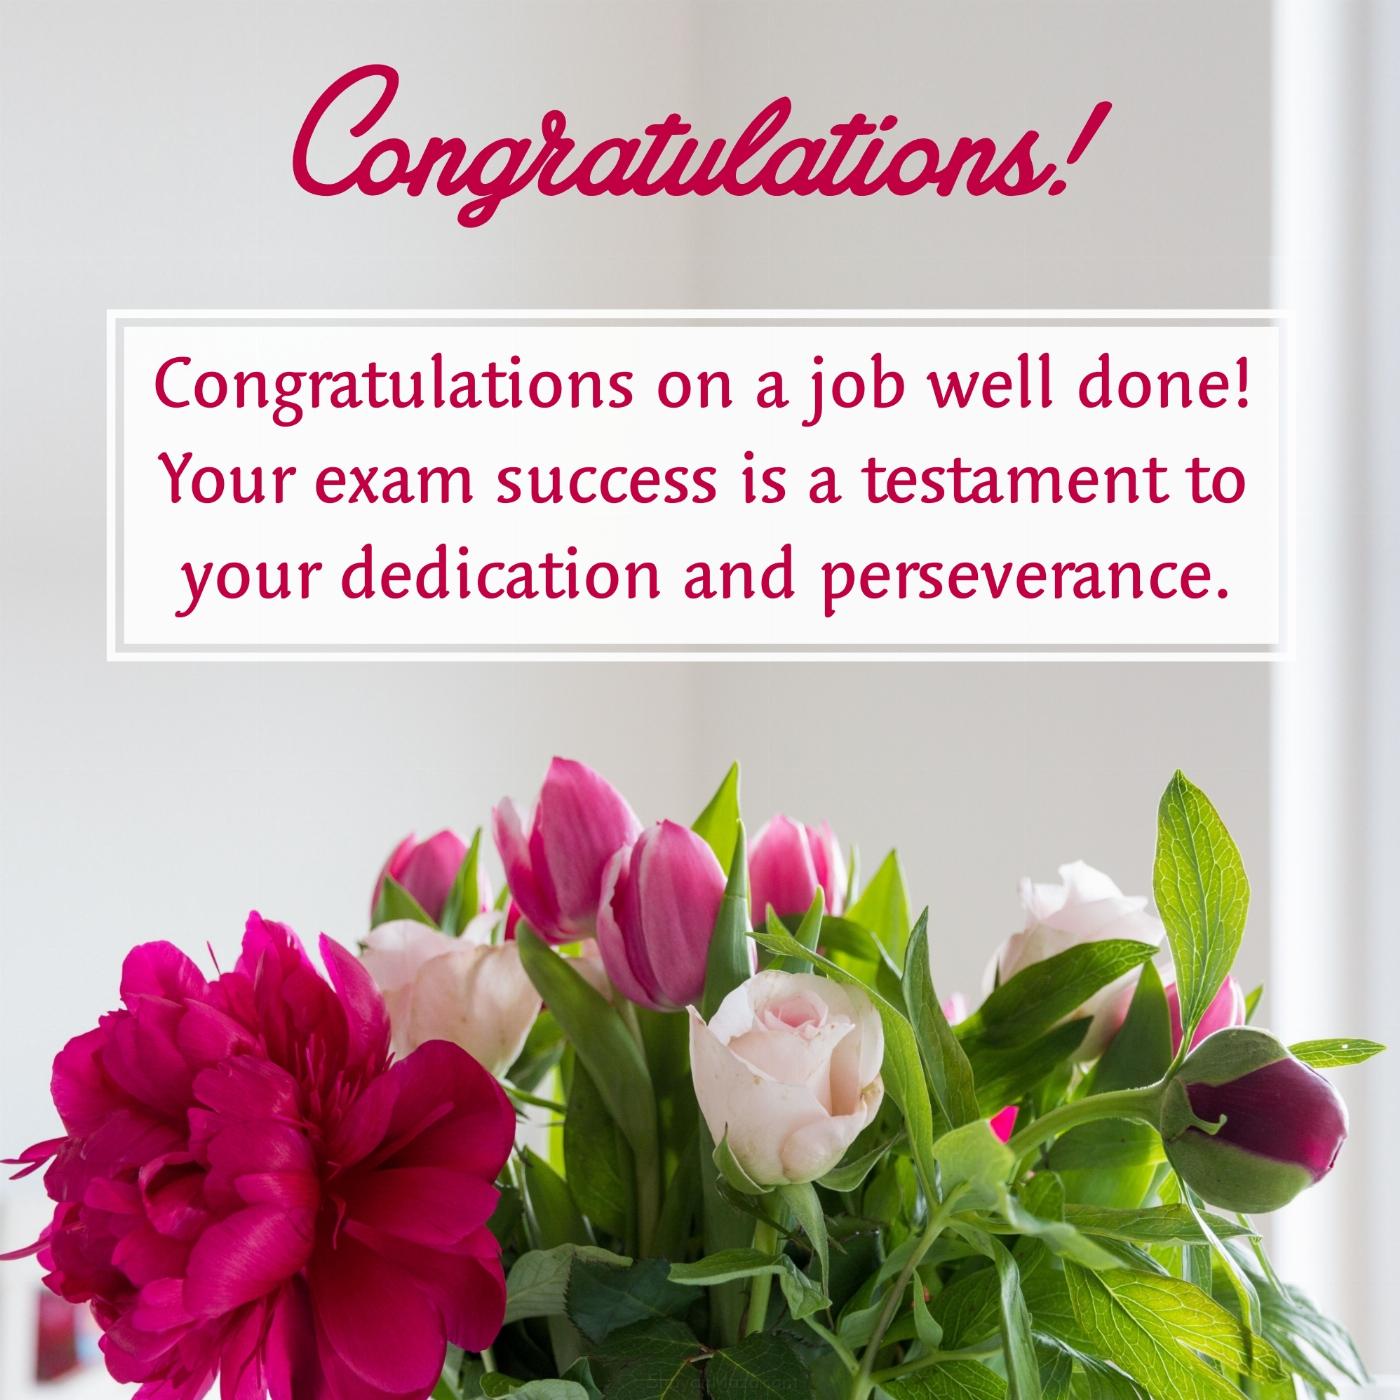 Congratulations on a job well done!